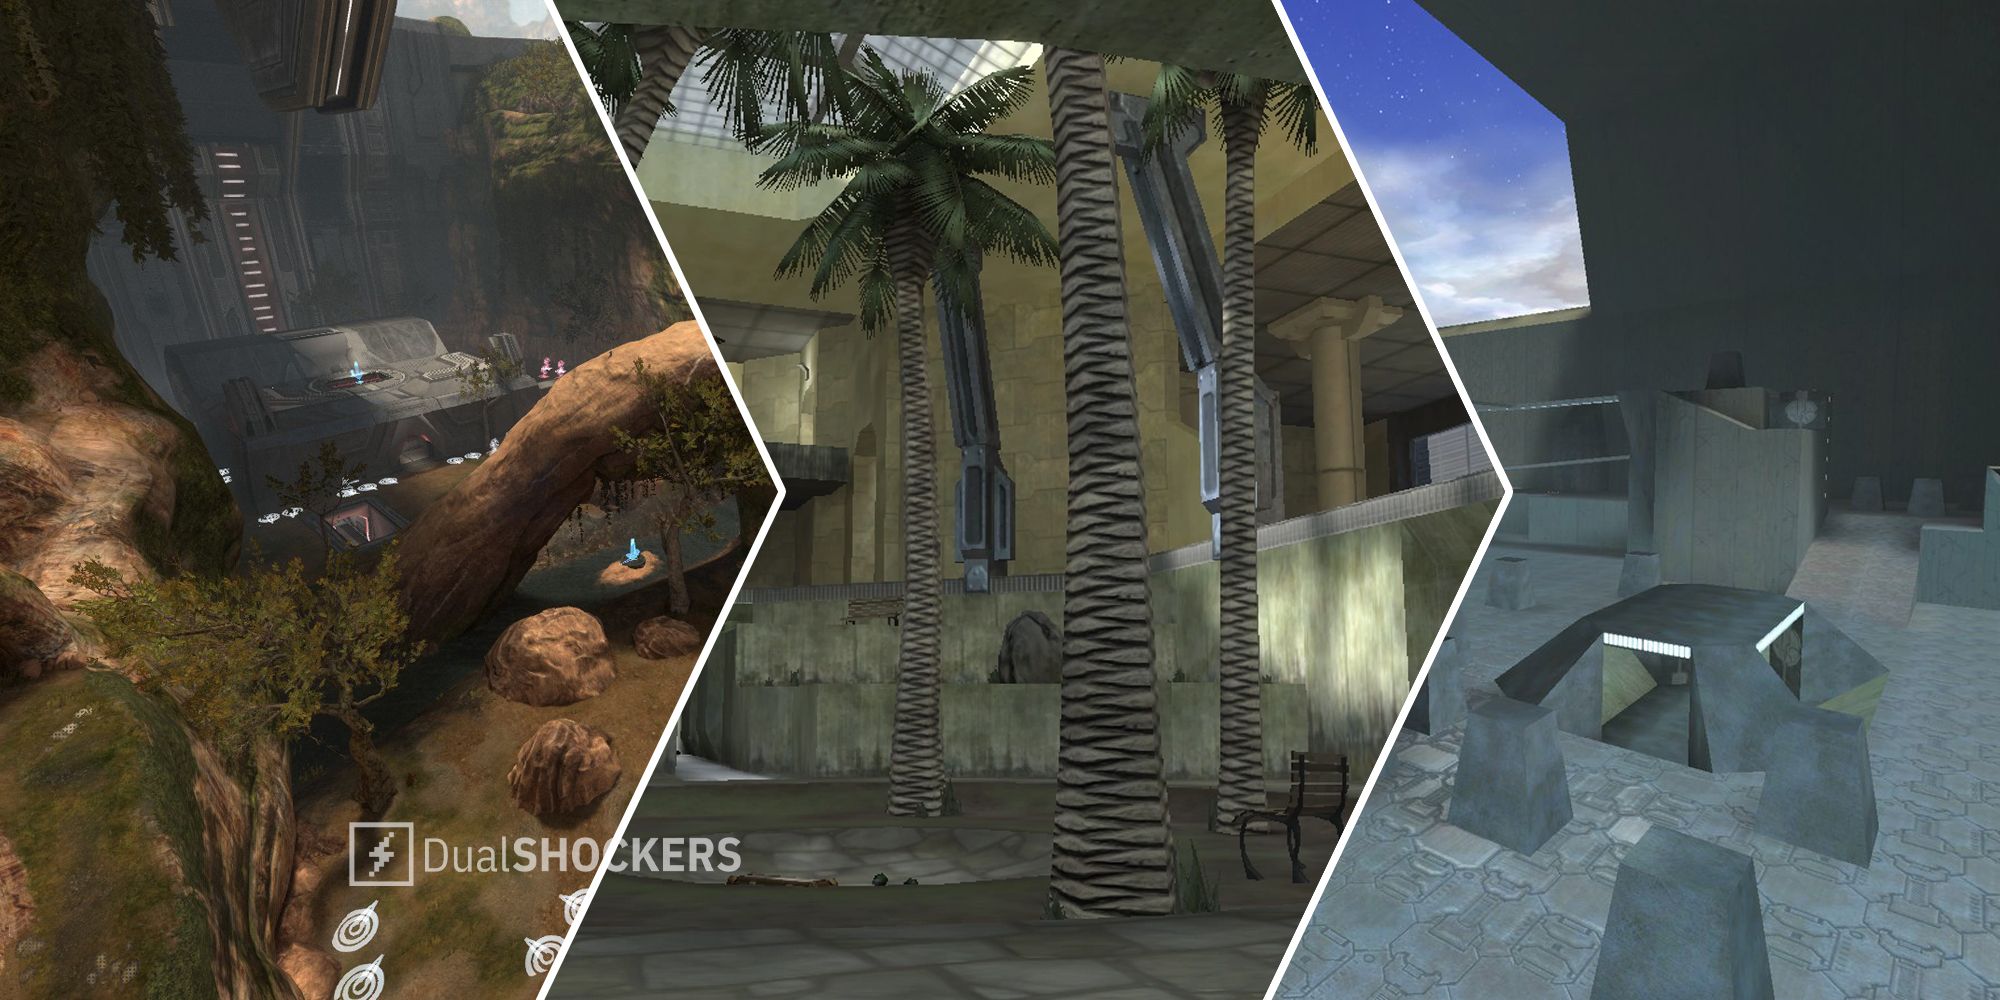 Halo Reach Battle Canyon, Halo 2 Ivory Tower, Halo Hang Em' High multiplayer maps